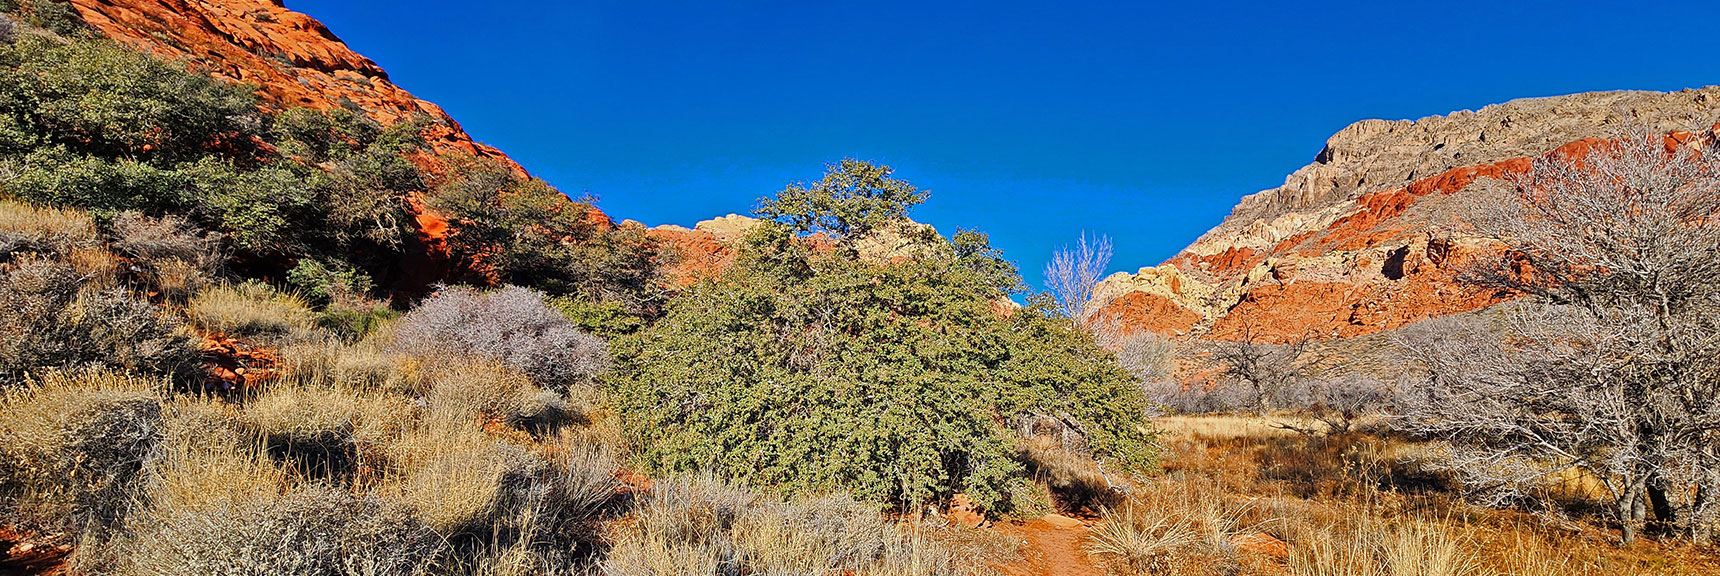 Ash Spring is a Beautiful Desert Oasis with Huge Desert Holly and Gambles Oak Trees | Upper Calico Hills Loop | Calico Basin and Red Rock Canyon, Nevada